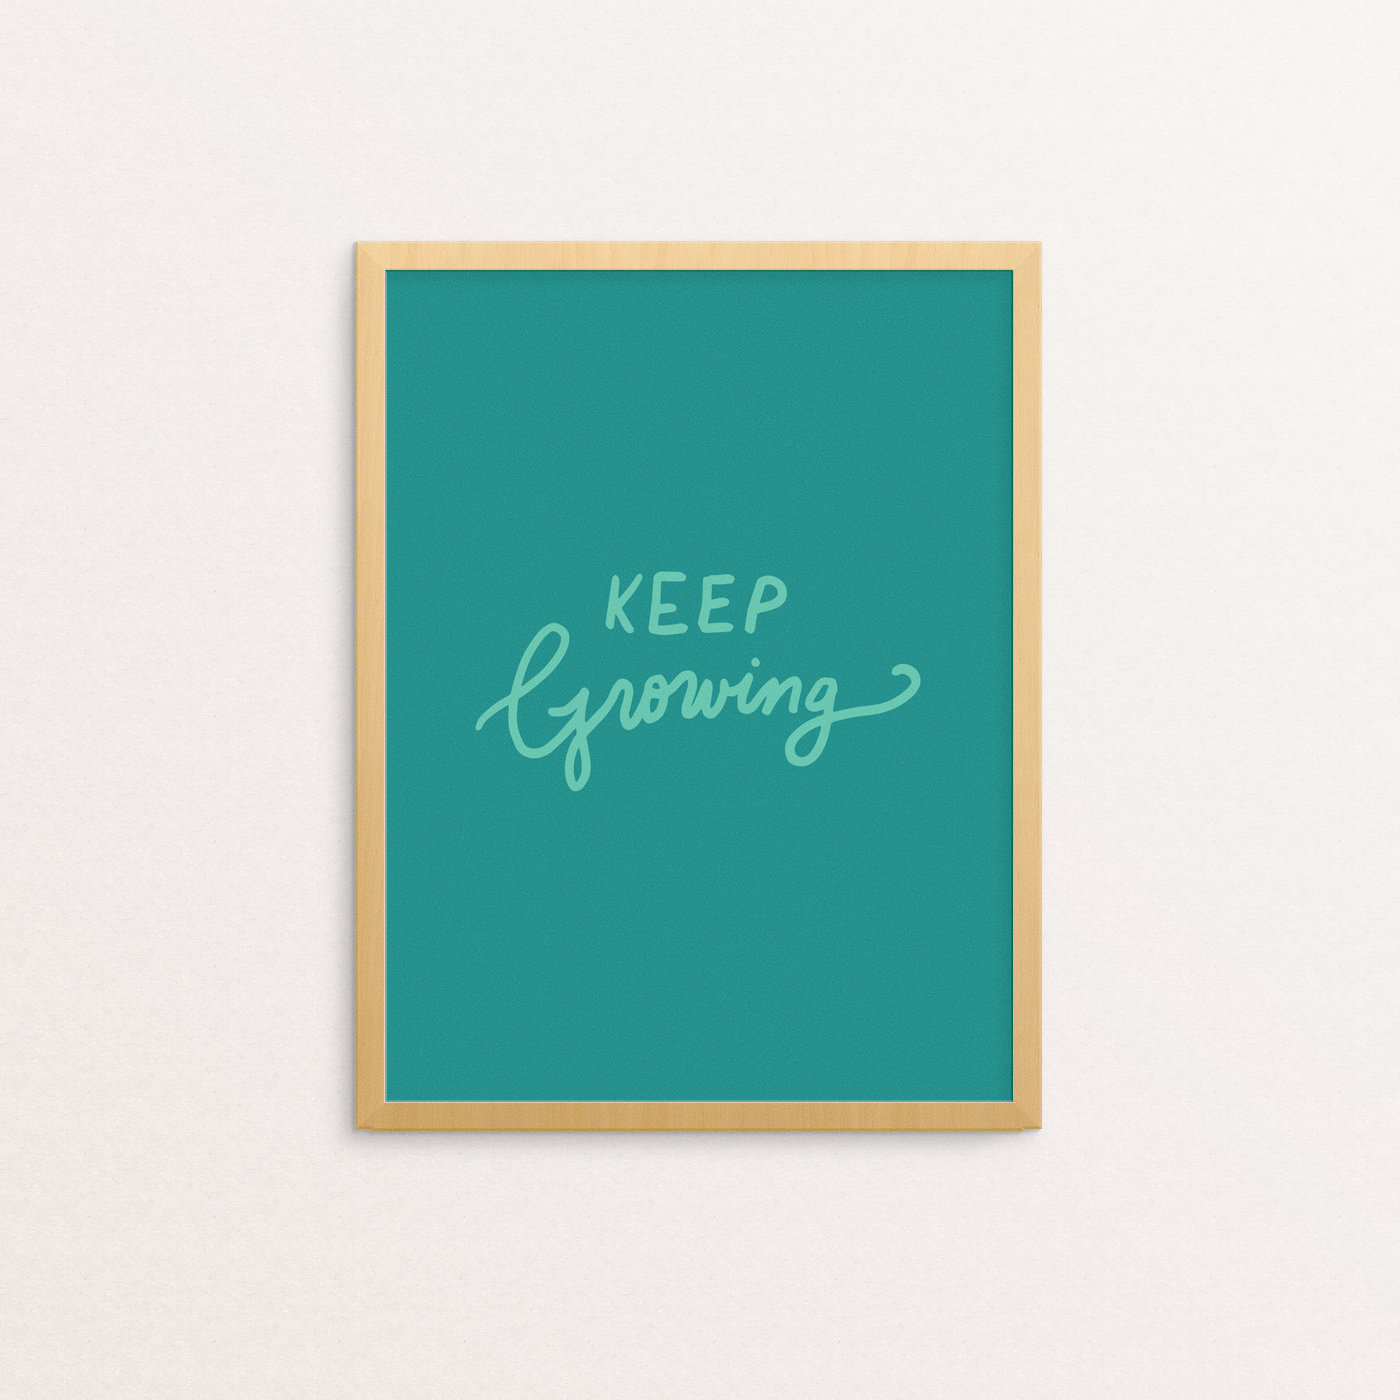 Art print with "Keep Growing" hand lettered in olive green on a jade green background